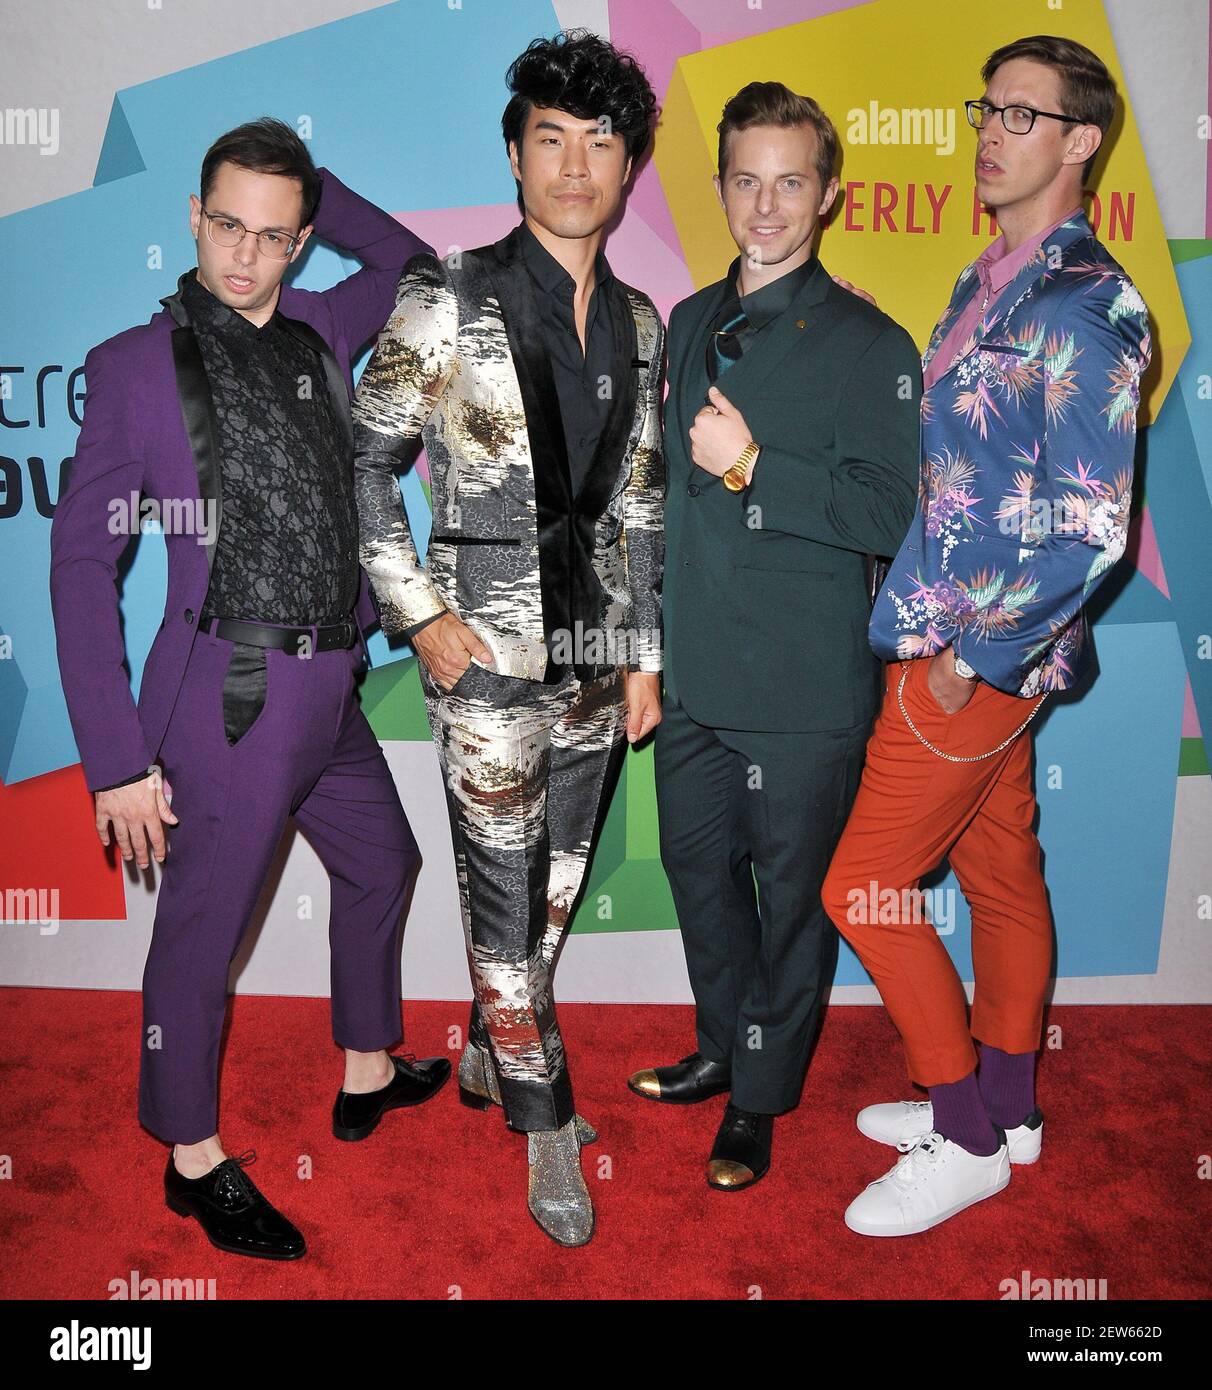 L-R) The Try Guys - Zach Kornfeld, Eugene Lee Yang, Ned Fulmer and Keith  Habersberger at The 7th Annual Streamy Awards held the Beverly Hilton in  Beverly Hills, CA on Tuesday, September